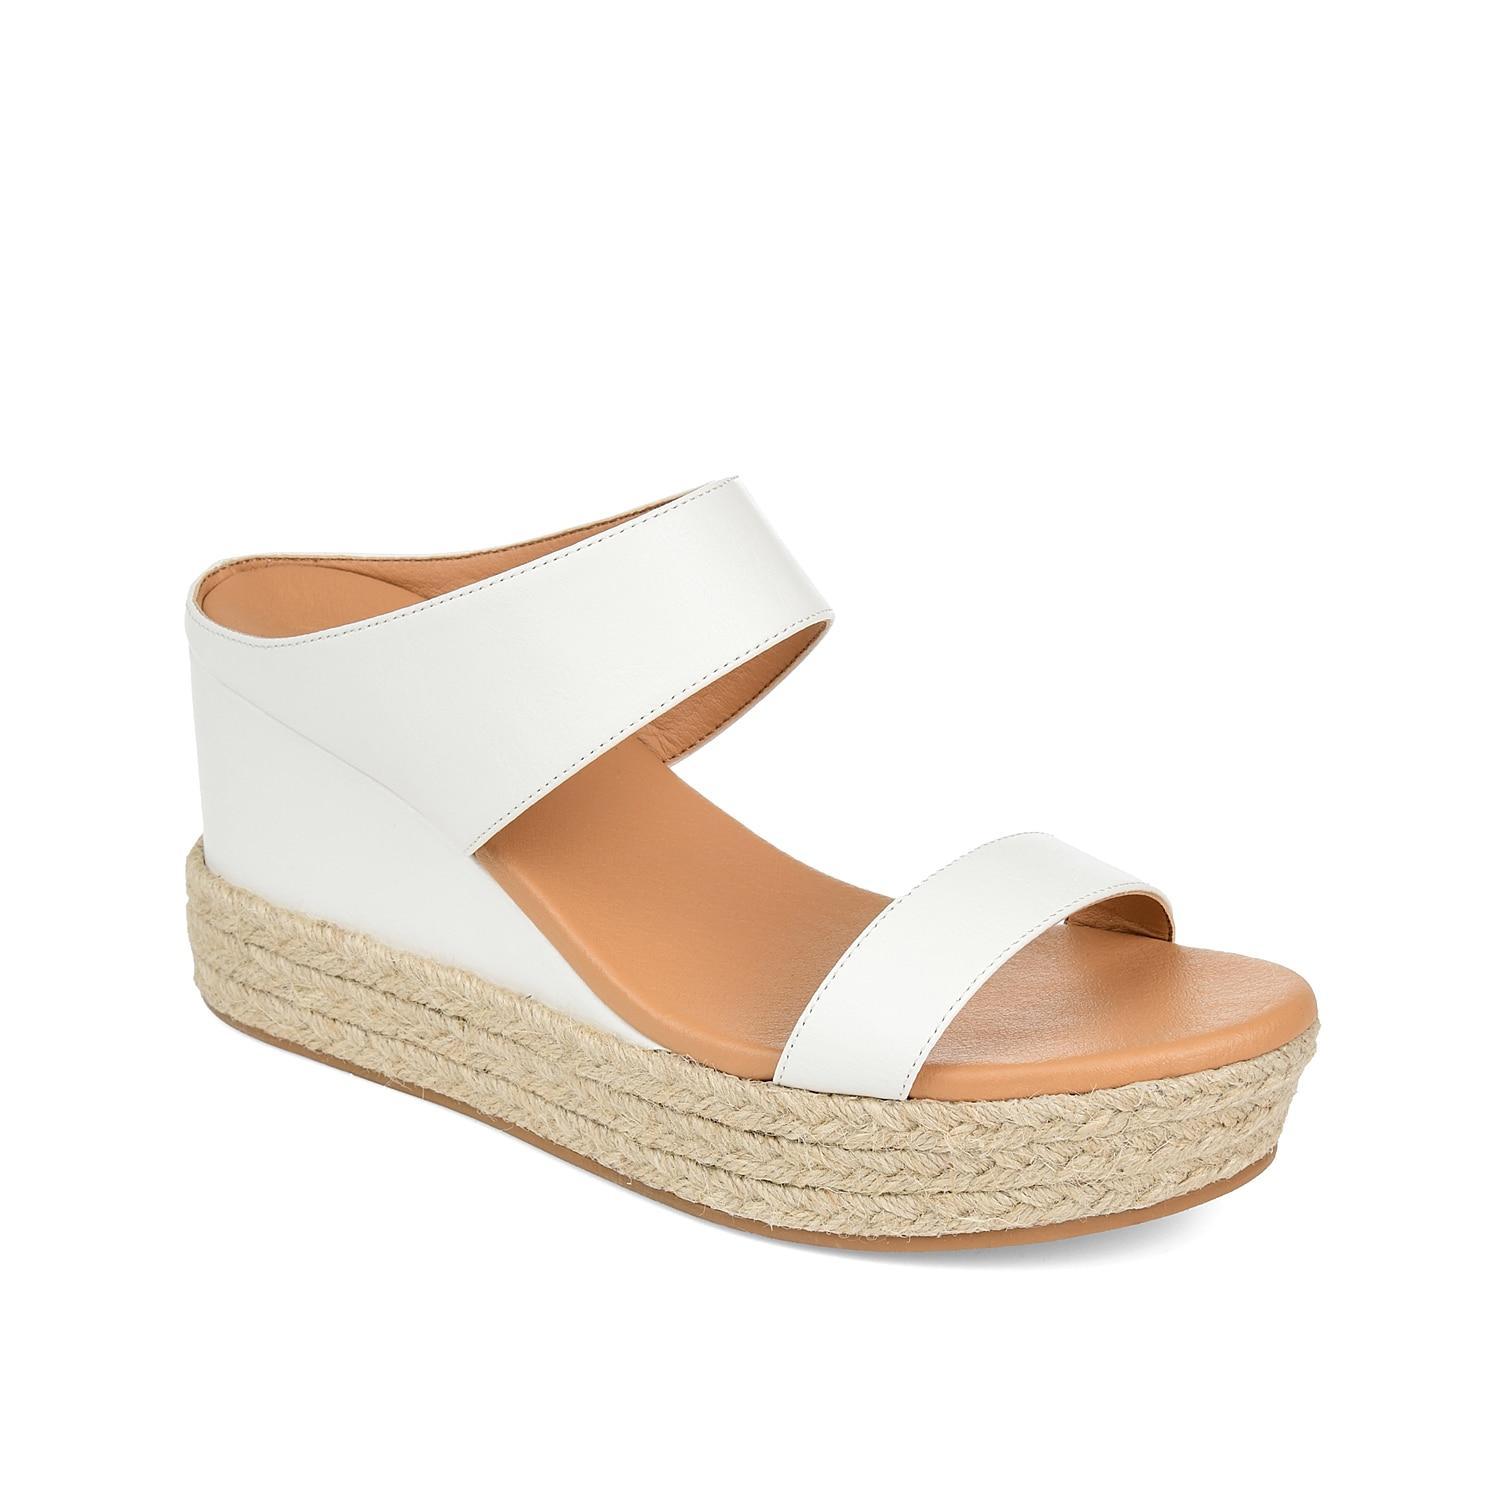 Journee Collection Alissa Womens Wedge Sandals Multicolor Product Image